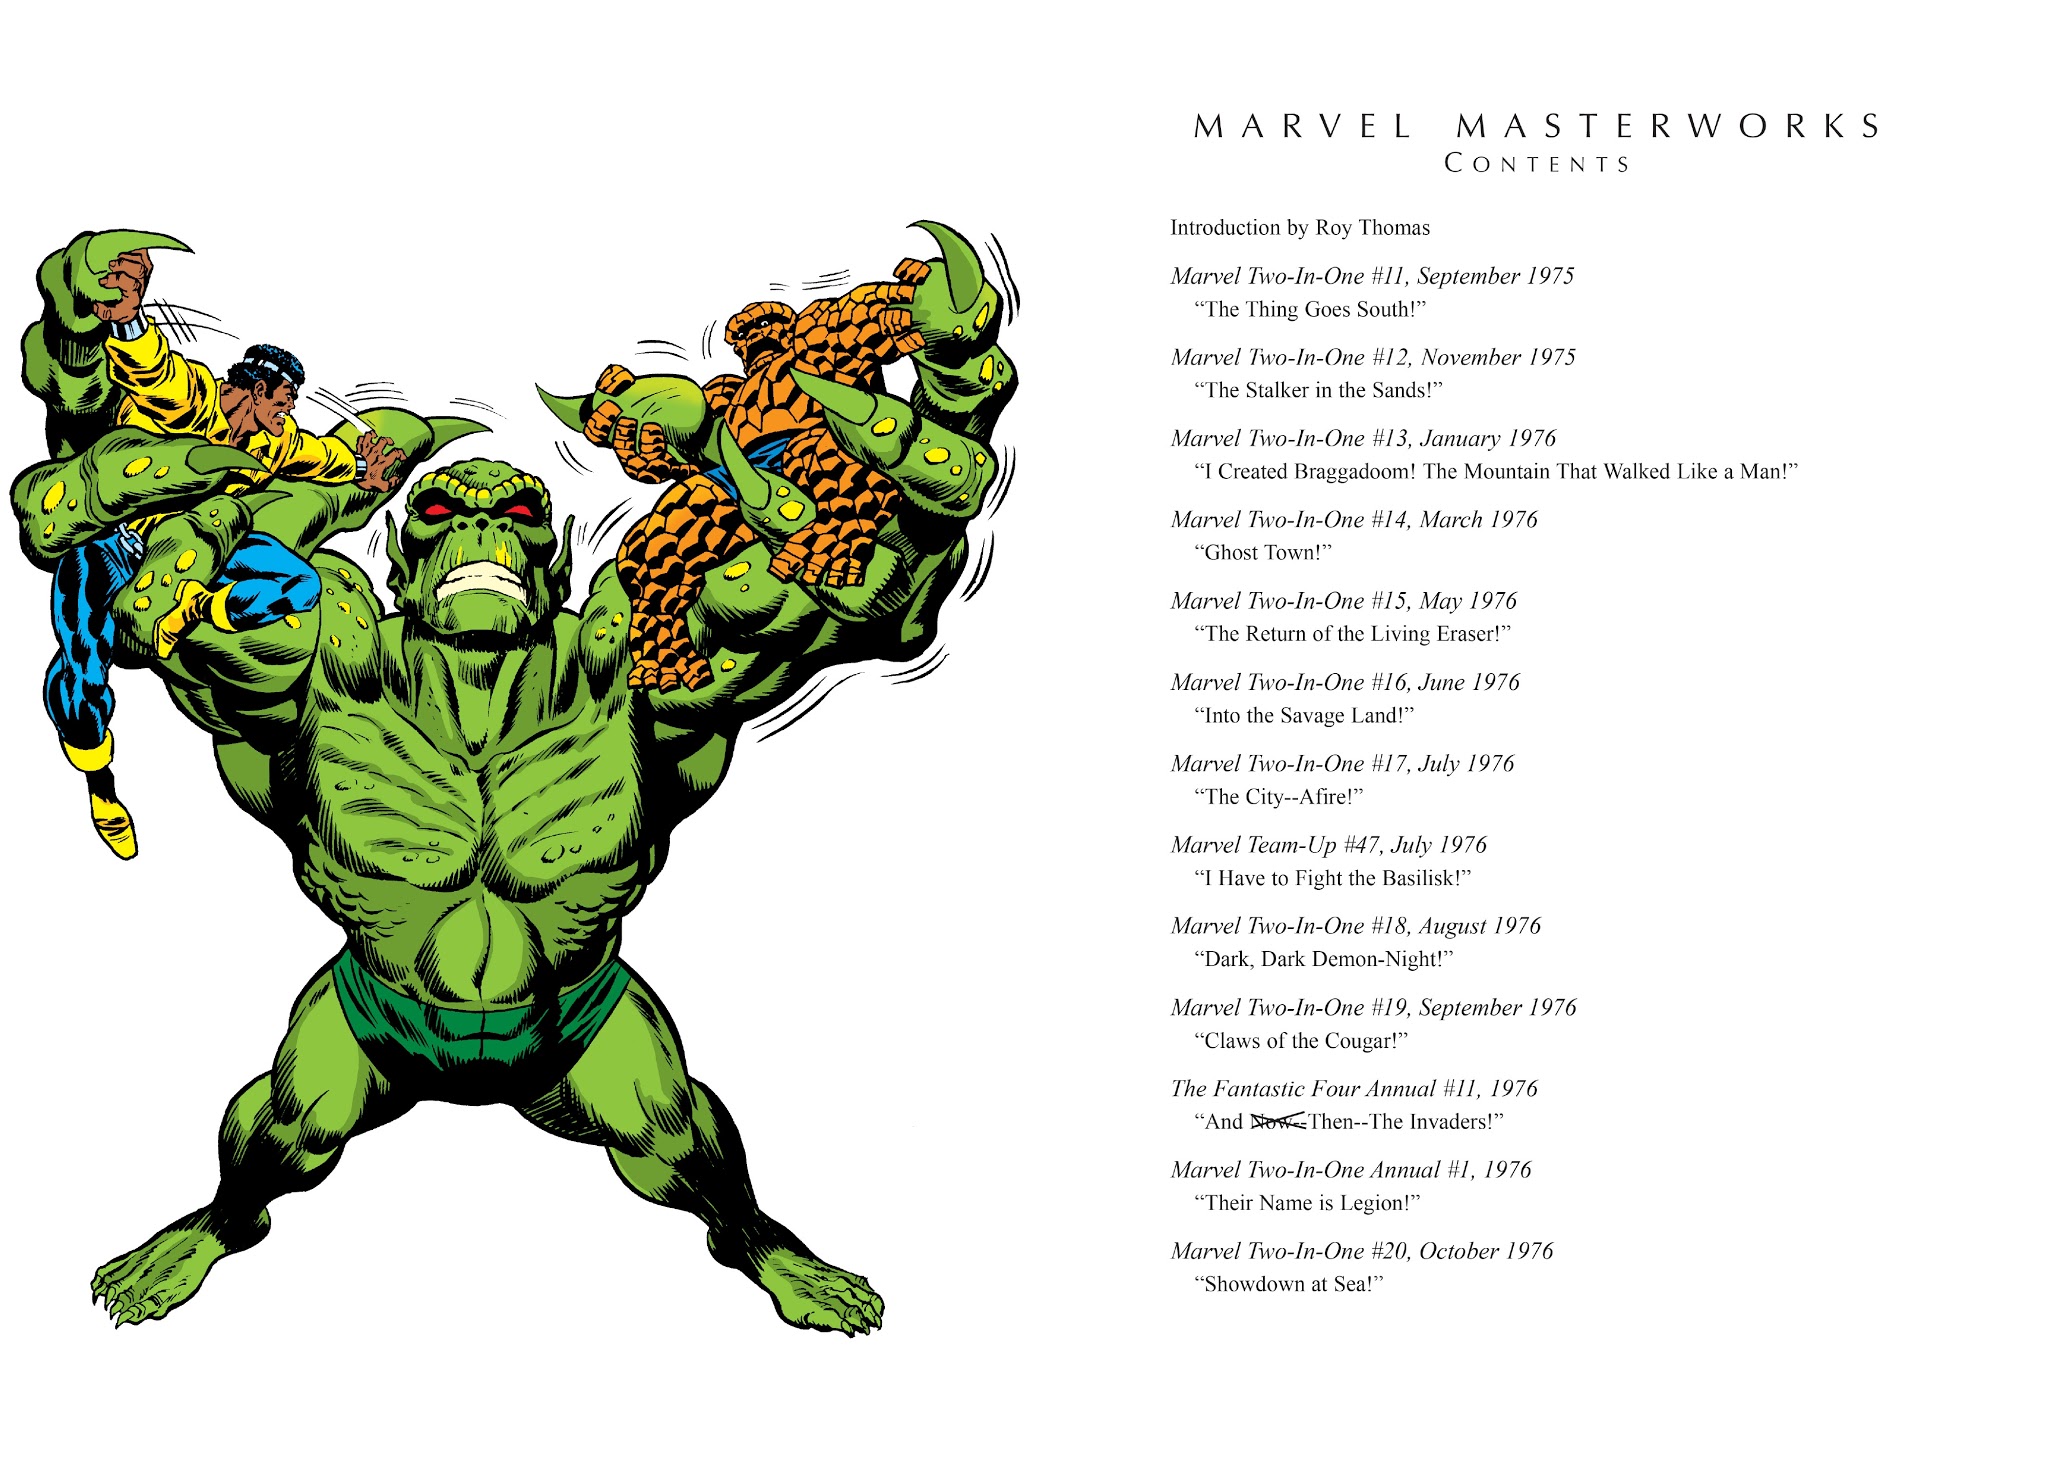 Read online Marvel Masterworks: Marvel Two-In-One comic -  Issue # TPB 2 - 4